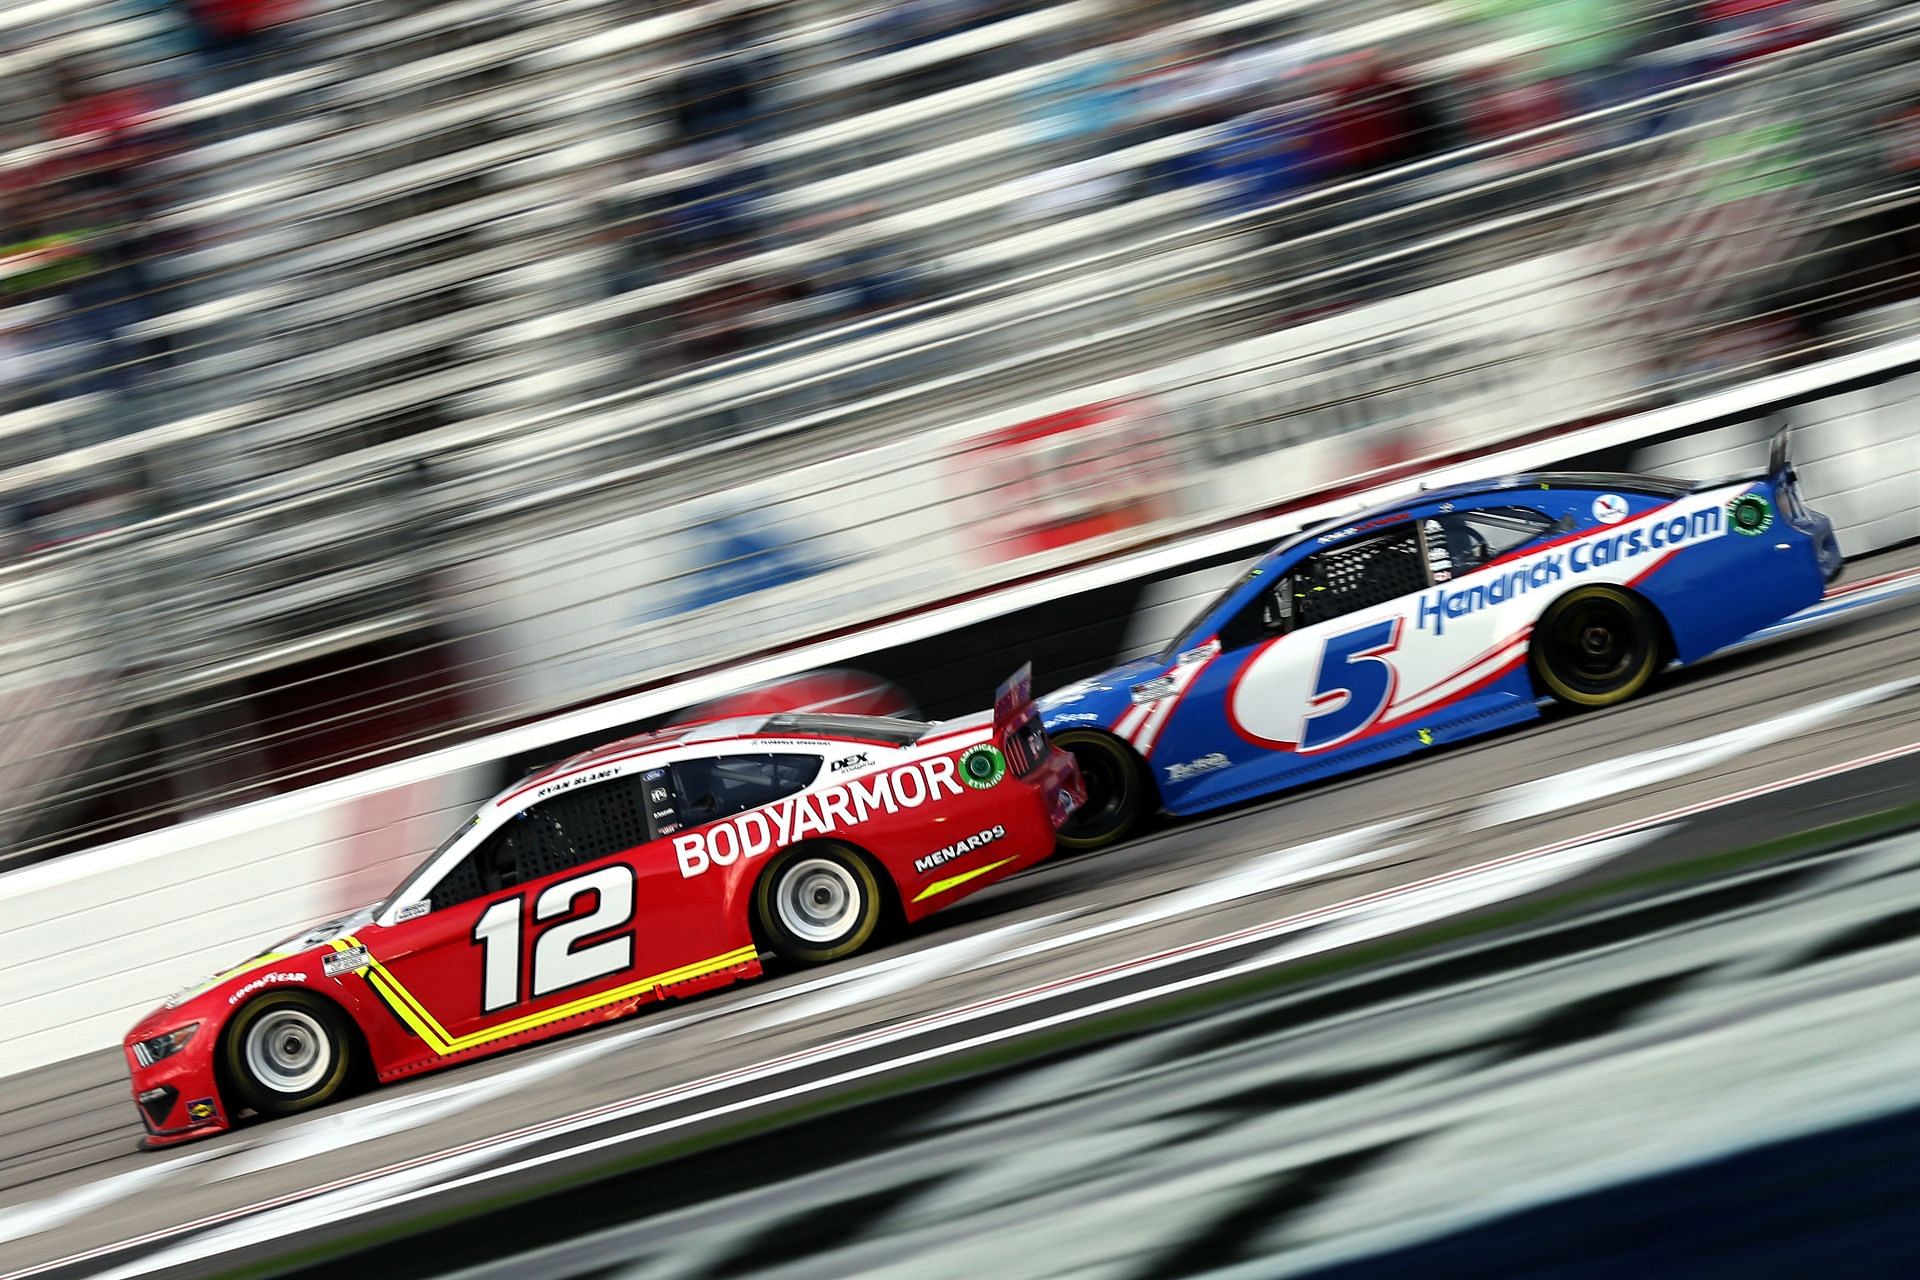 Ryan Blaney in the #12 BodyArmor Ford leads Kyle Larson in the #5 HendrickCars.com Chevrolet during the NASCAR Cup Series Folds of Honor QuikTrip 500 at Atlanta Motor Speedway in 2021 (Photo by Sean Gardner/Getty Images)